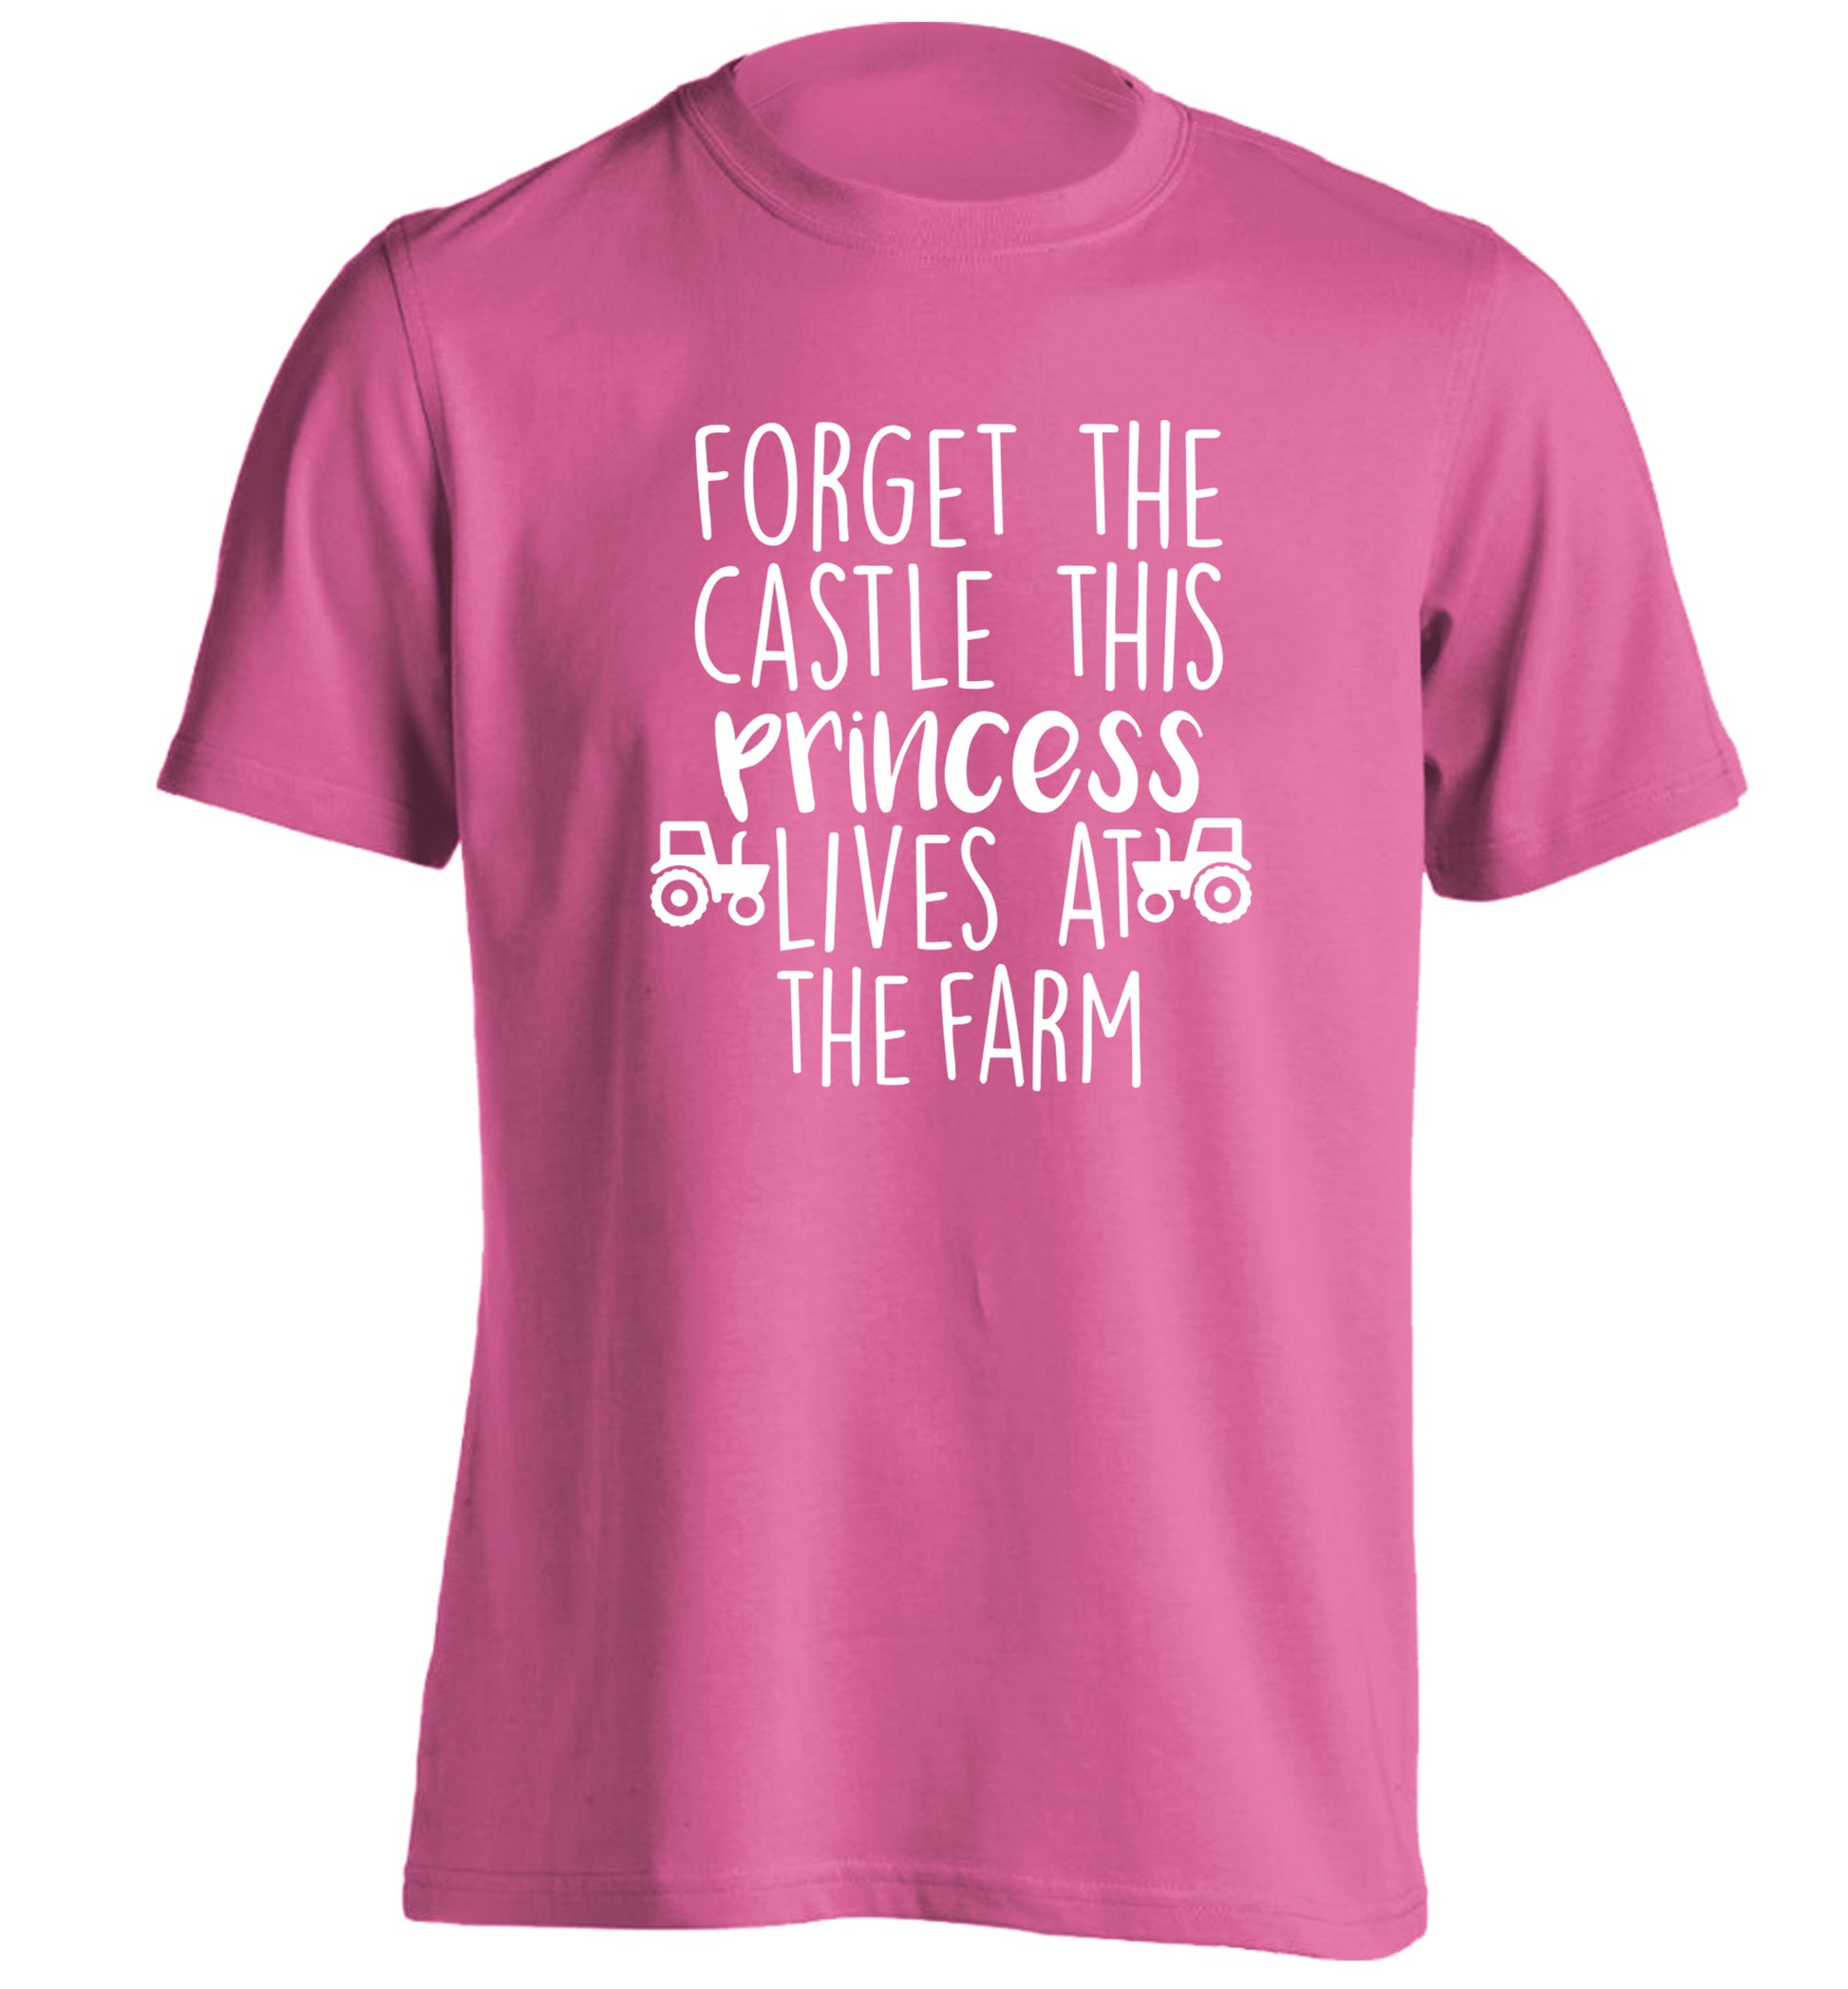 Forget the castle this princess lives at the farm adults unisex pink Tshirt 2XL